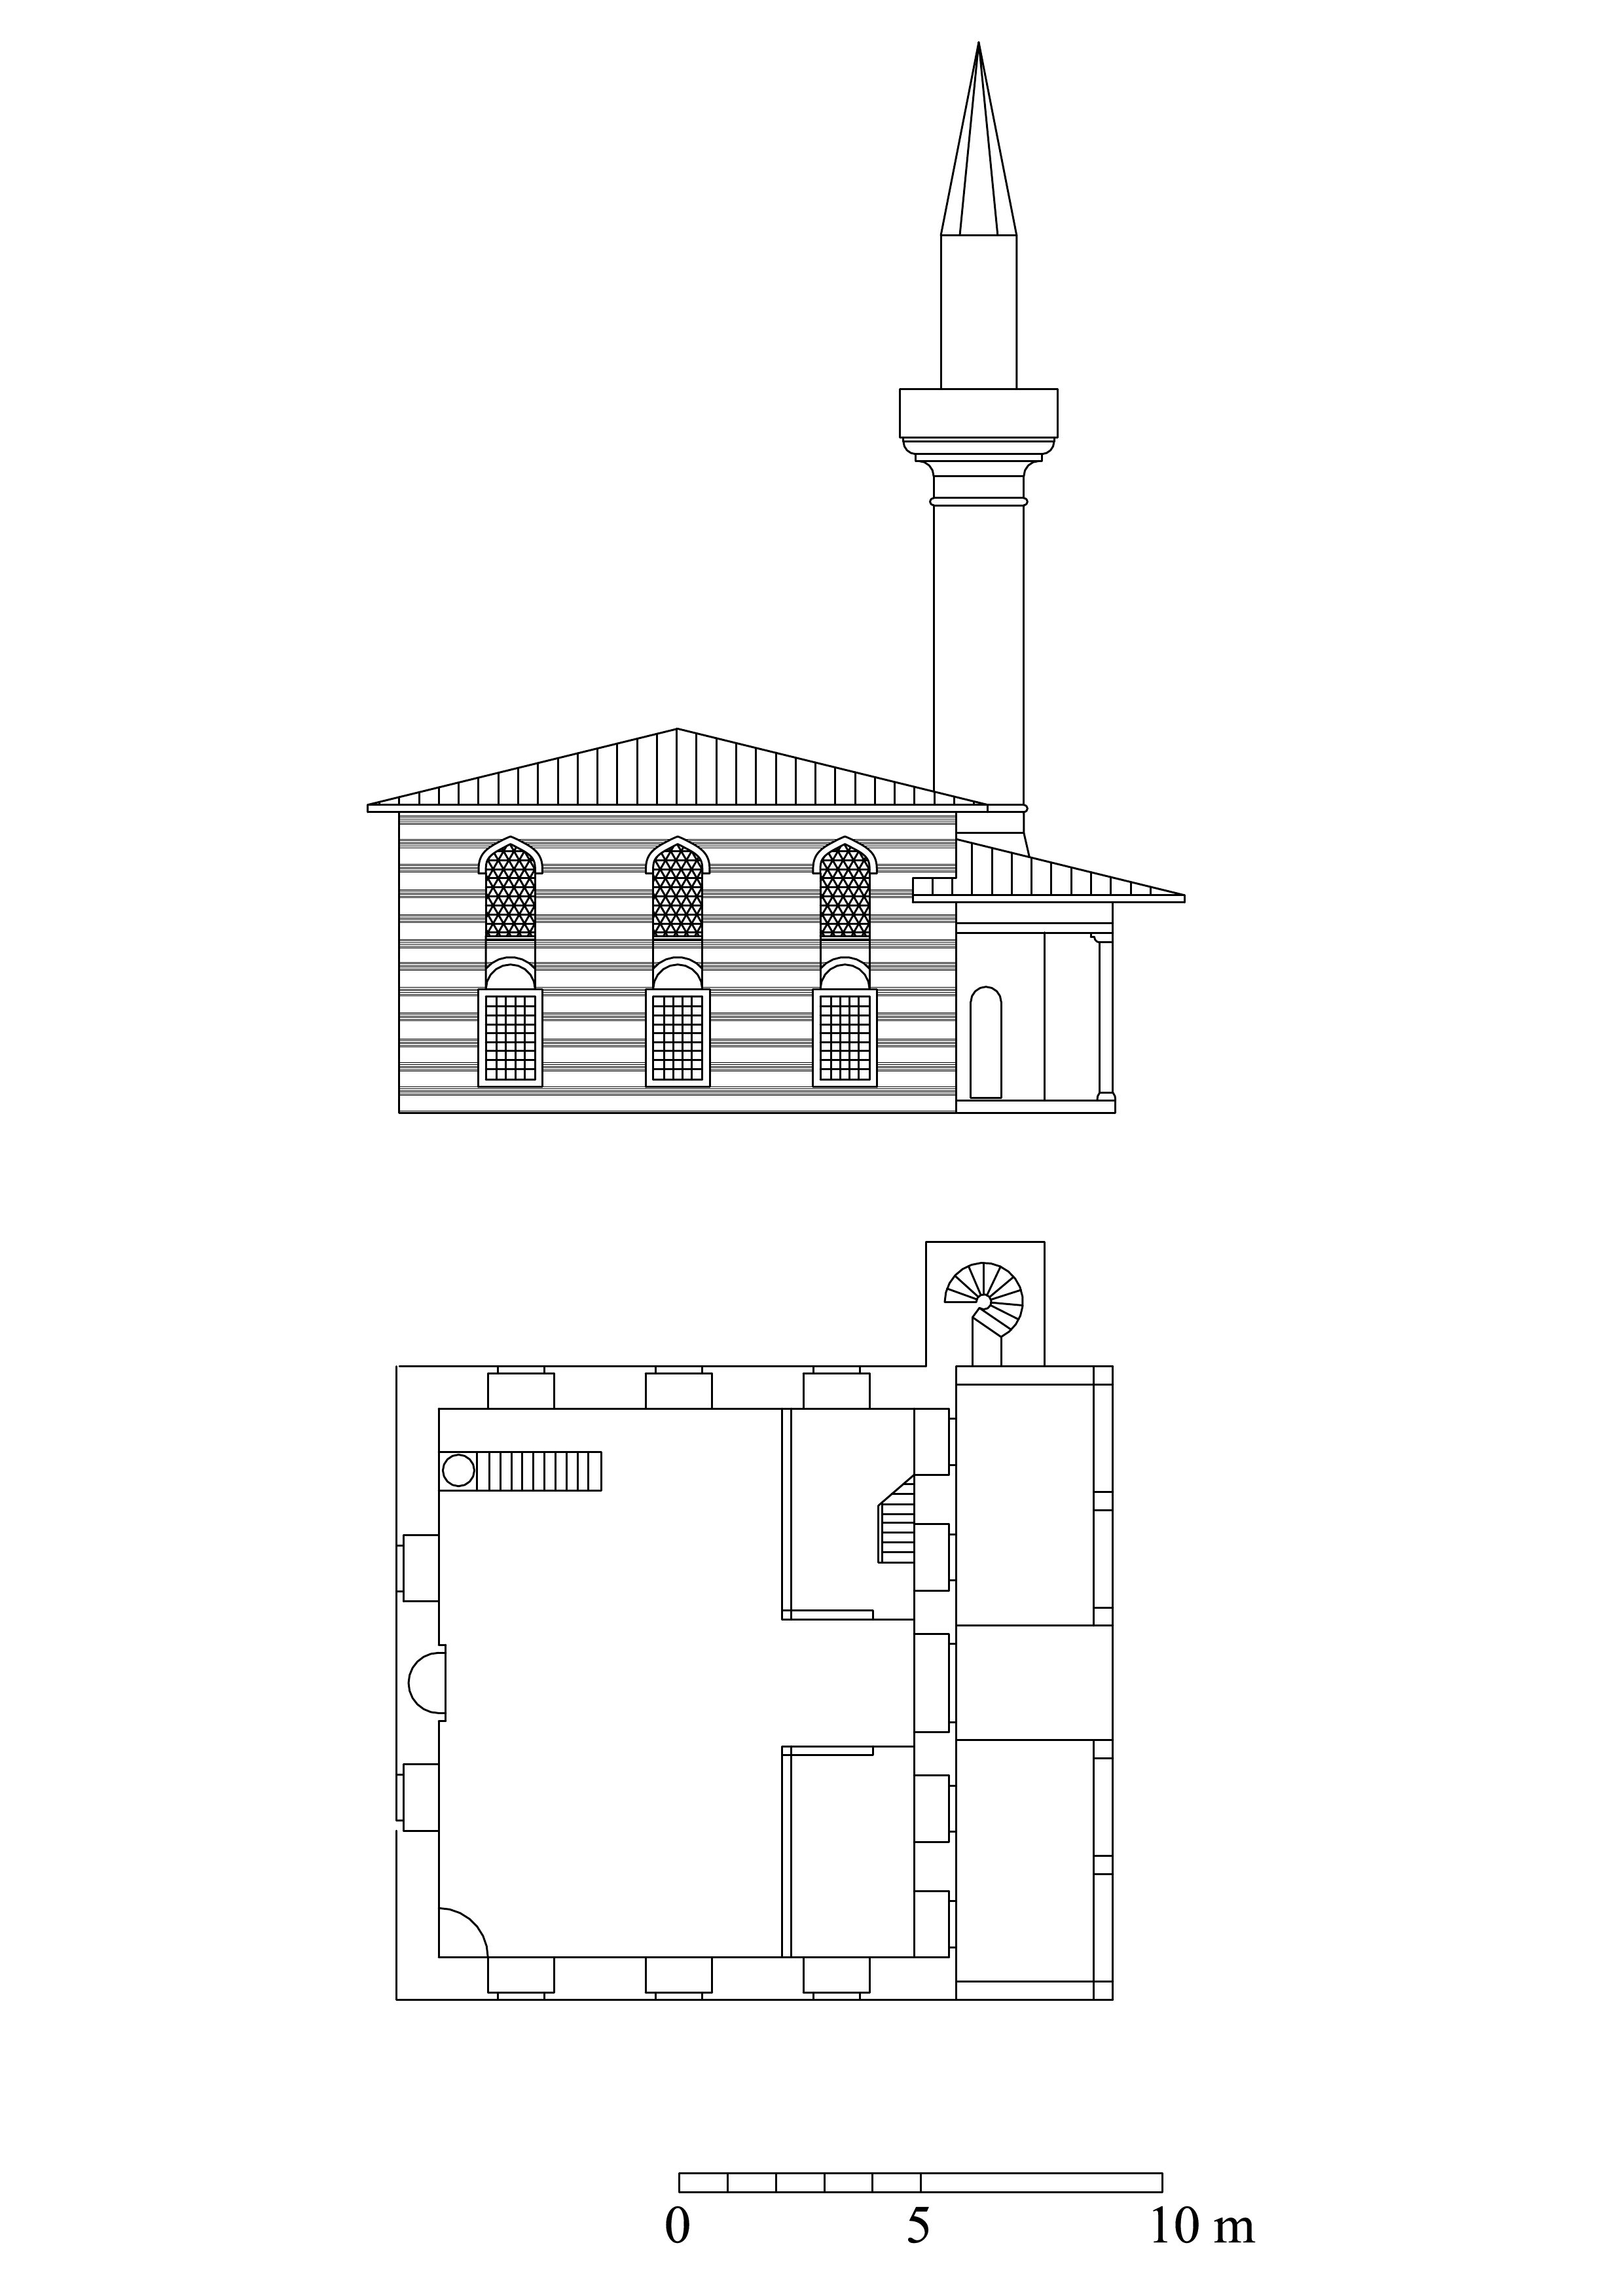 Sah Sultan Mosque - Floor plan and elevation. DWG file in AutoCAD 2000 format. Click the download button to download a zipped file containing the .dwg file.